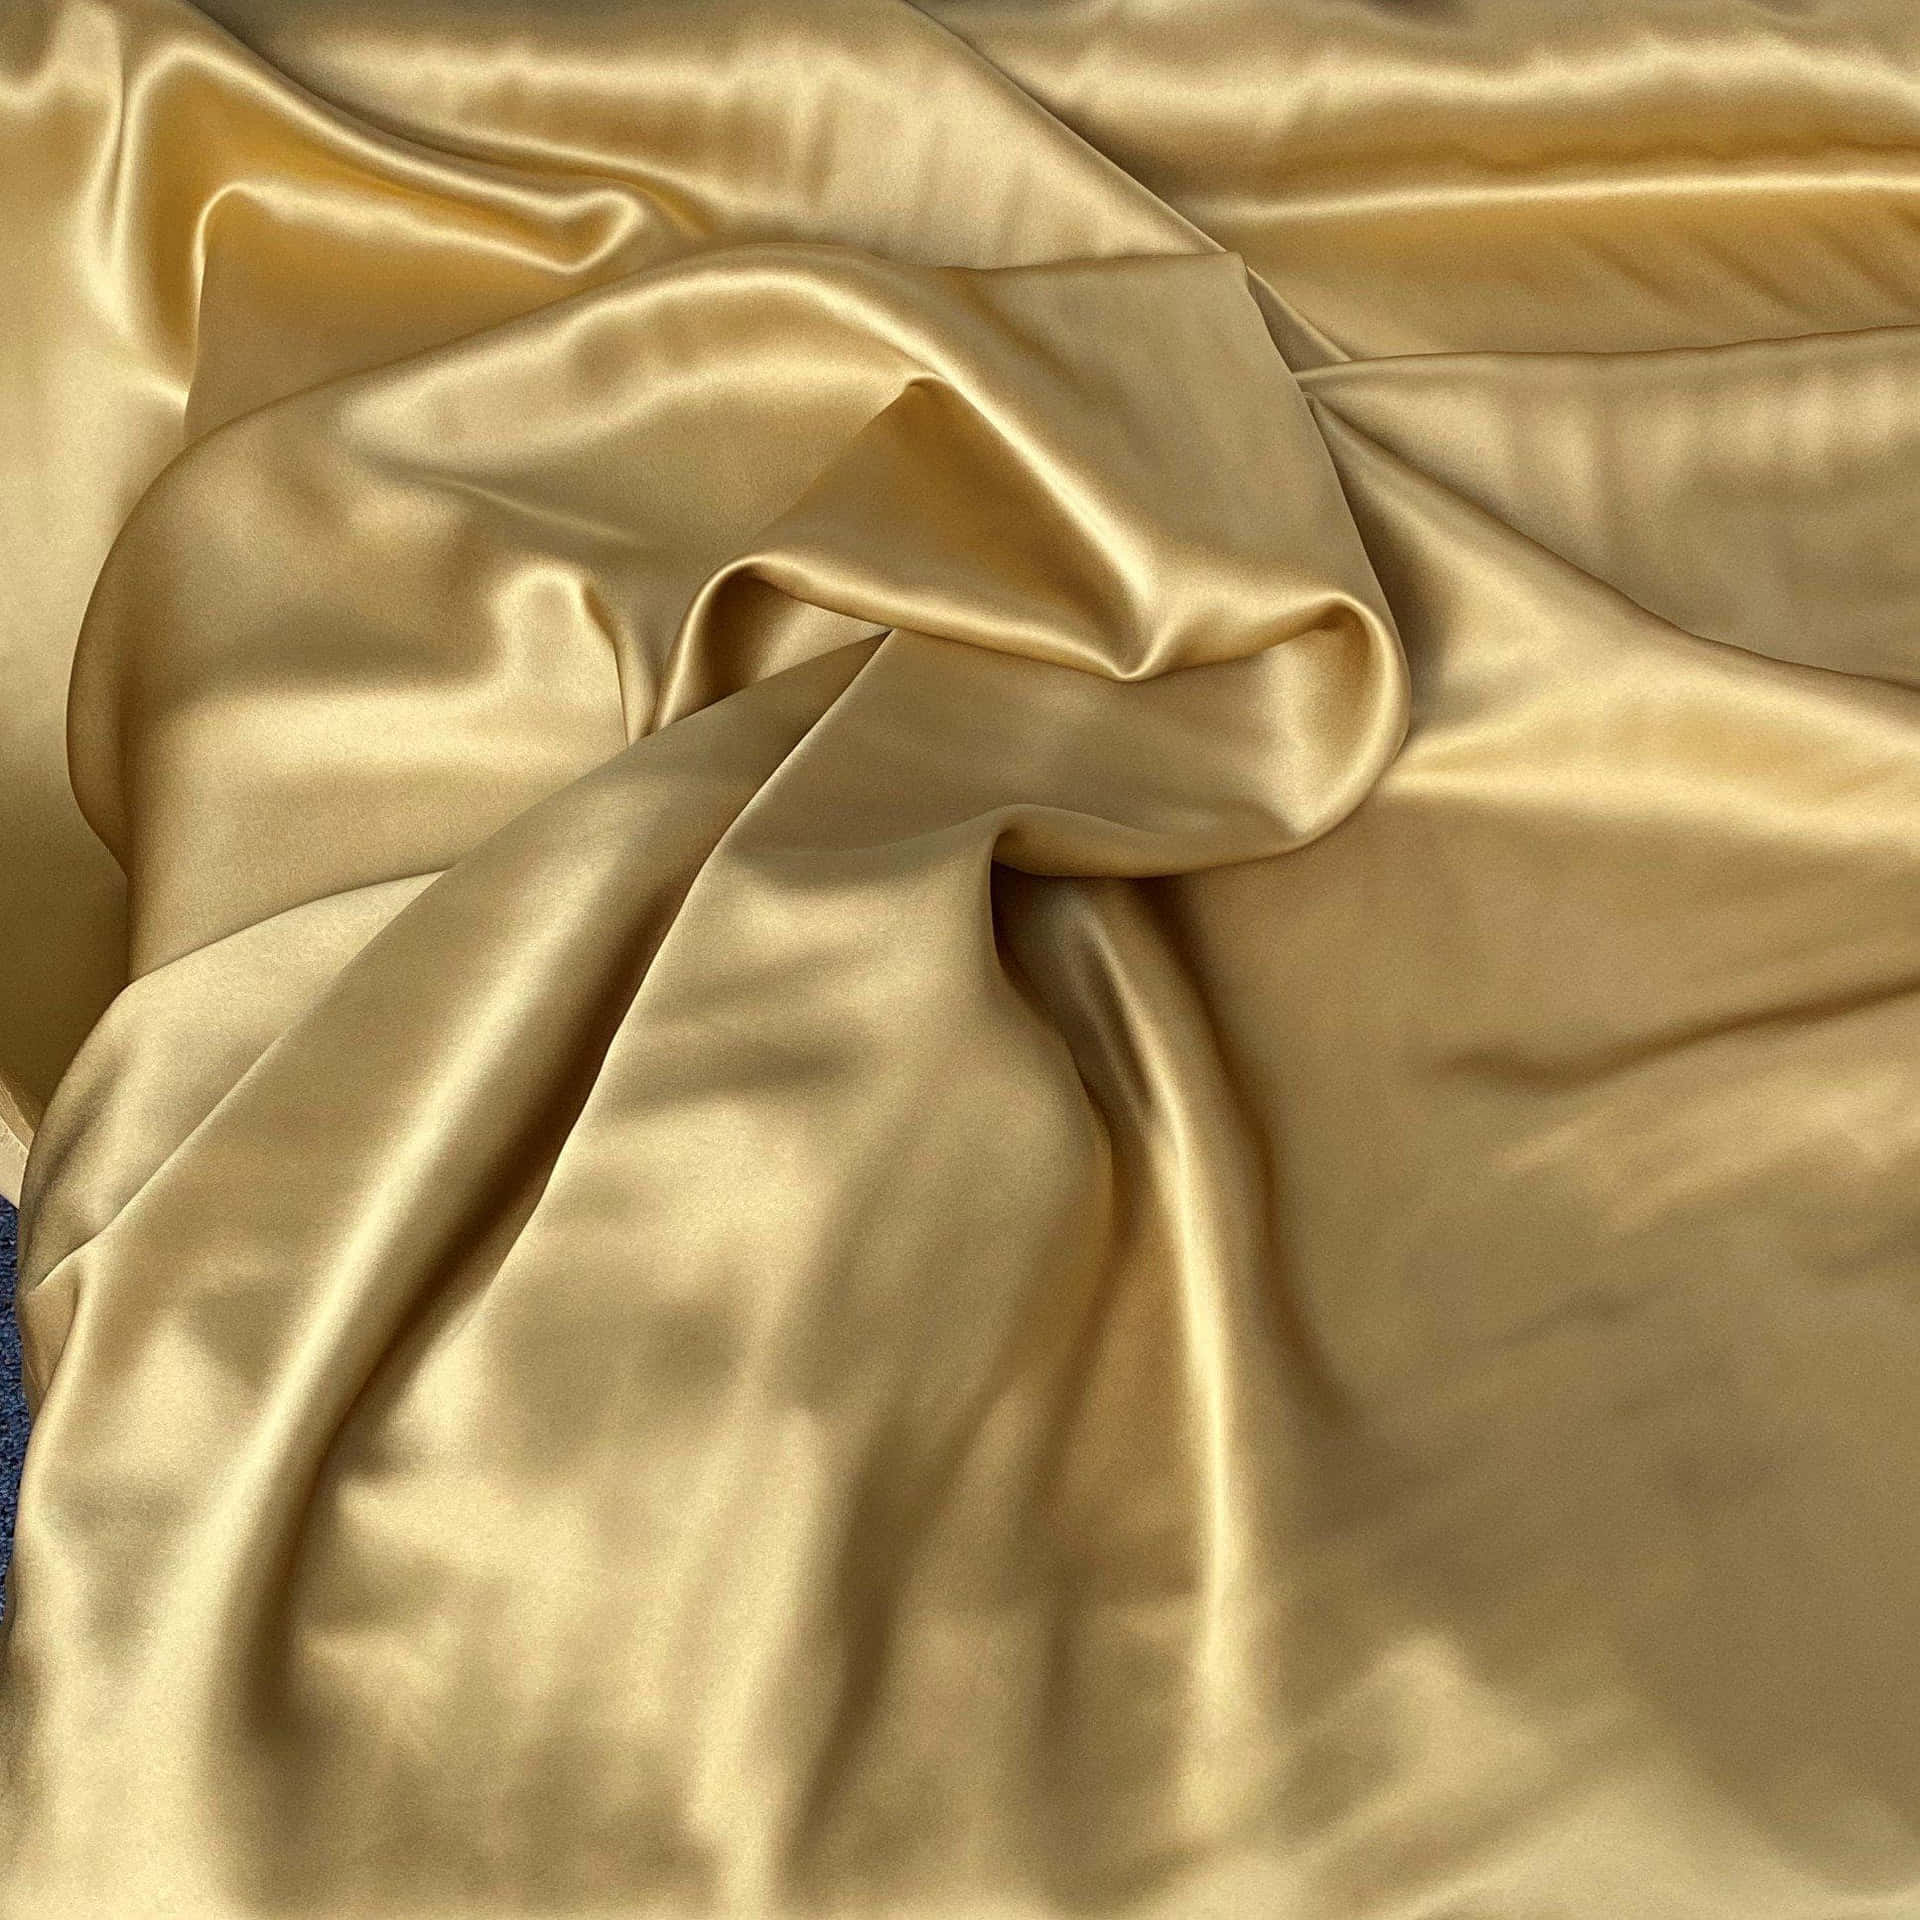 A beautiful warm-looking fabric in shades of gold and yellow. Wallpaper